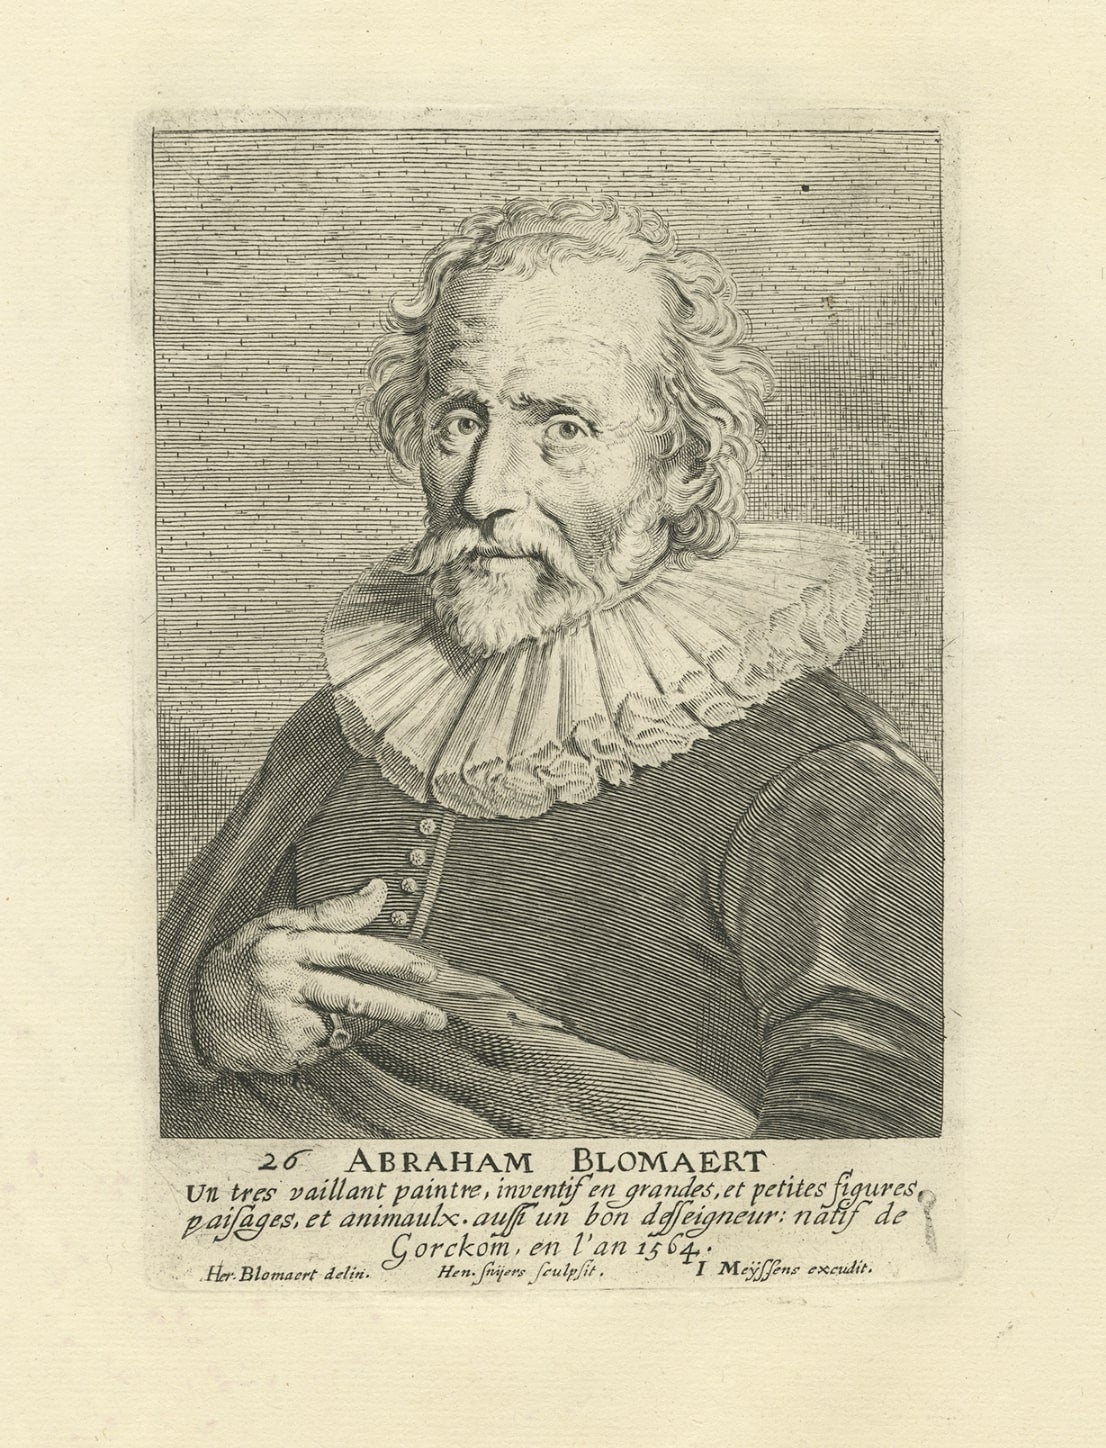 Antique print, titled: 'Abraham Blomaert' 

Portrait of Abraham Bloemaert after a self-portrait by Bloemaert, engraved by Hendrik Snijers. Abraham Bloemaert (1566 - 1651) was a Dutch painter and printmaker in etching and engraving. He was one of